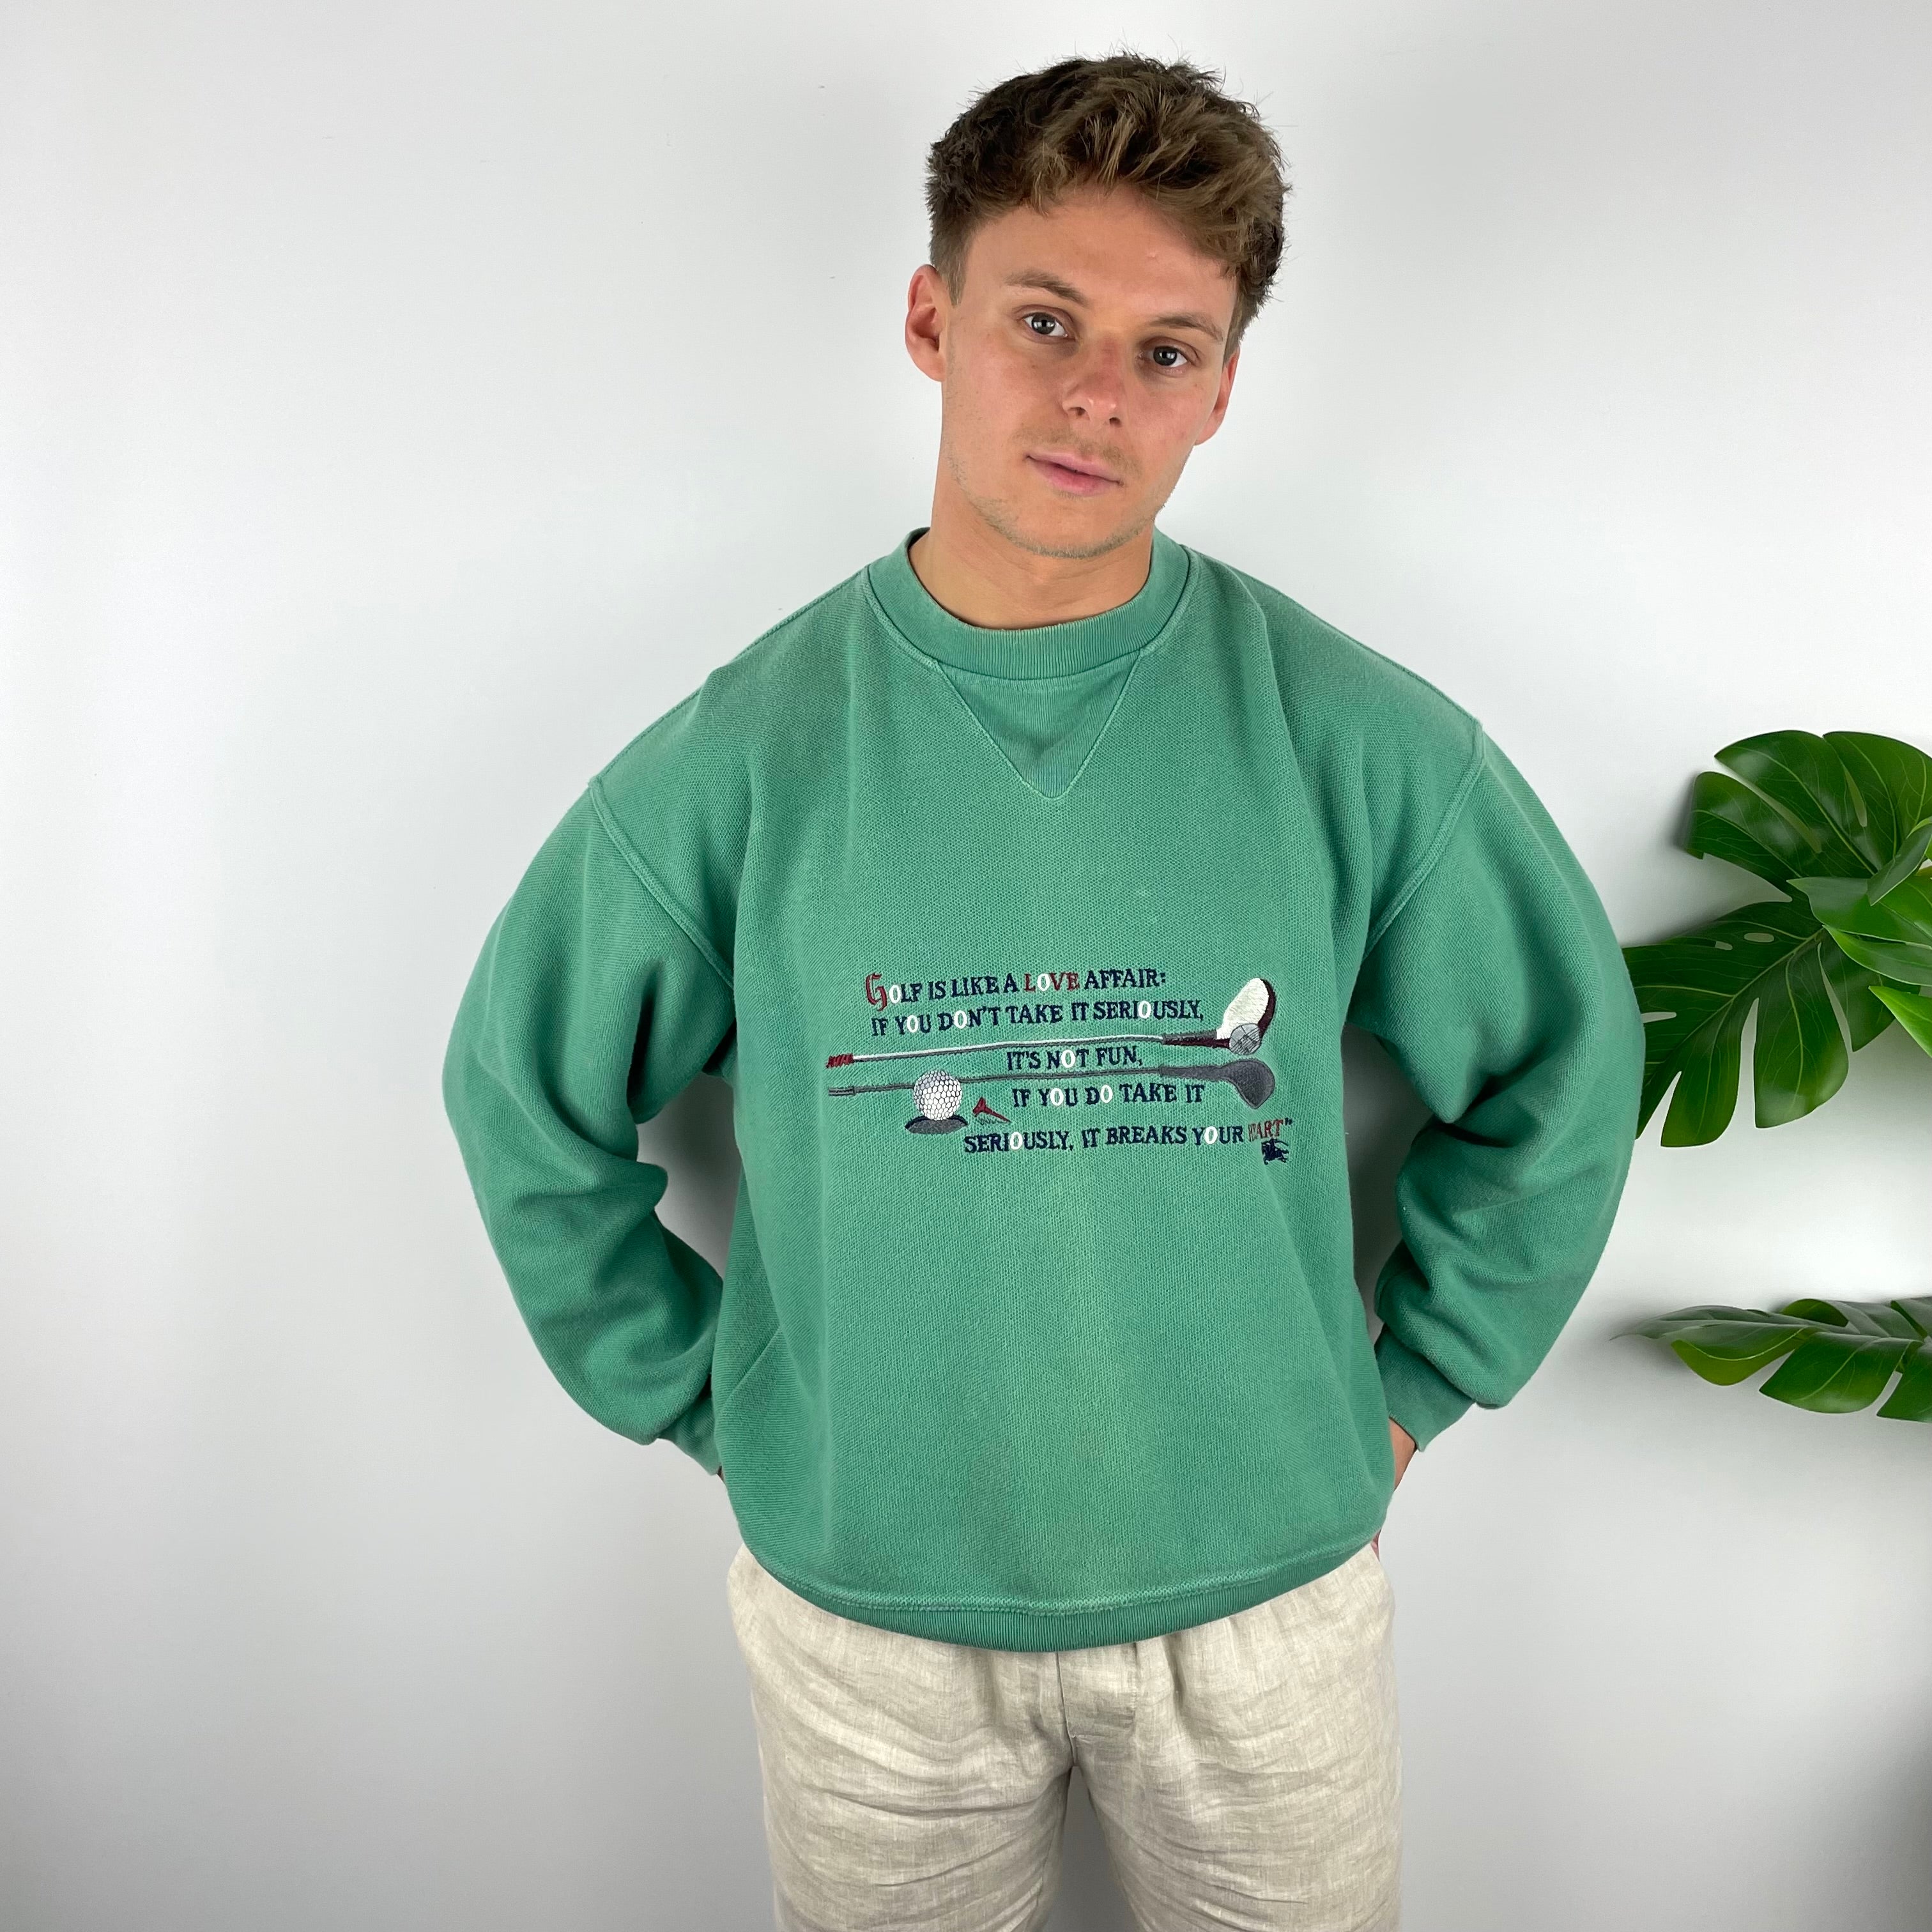 Burberry Golf RARE Green Embroidered Spell Out Sweatshirt (XL)